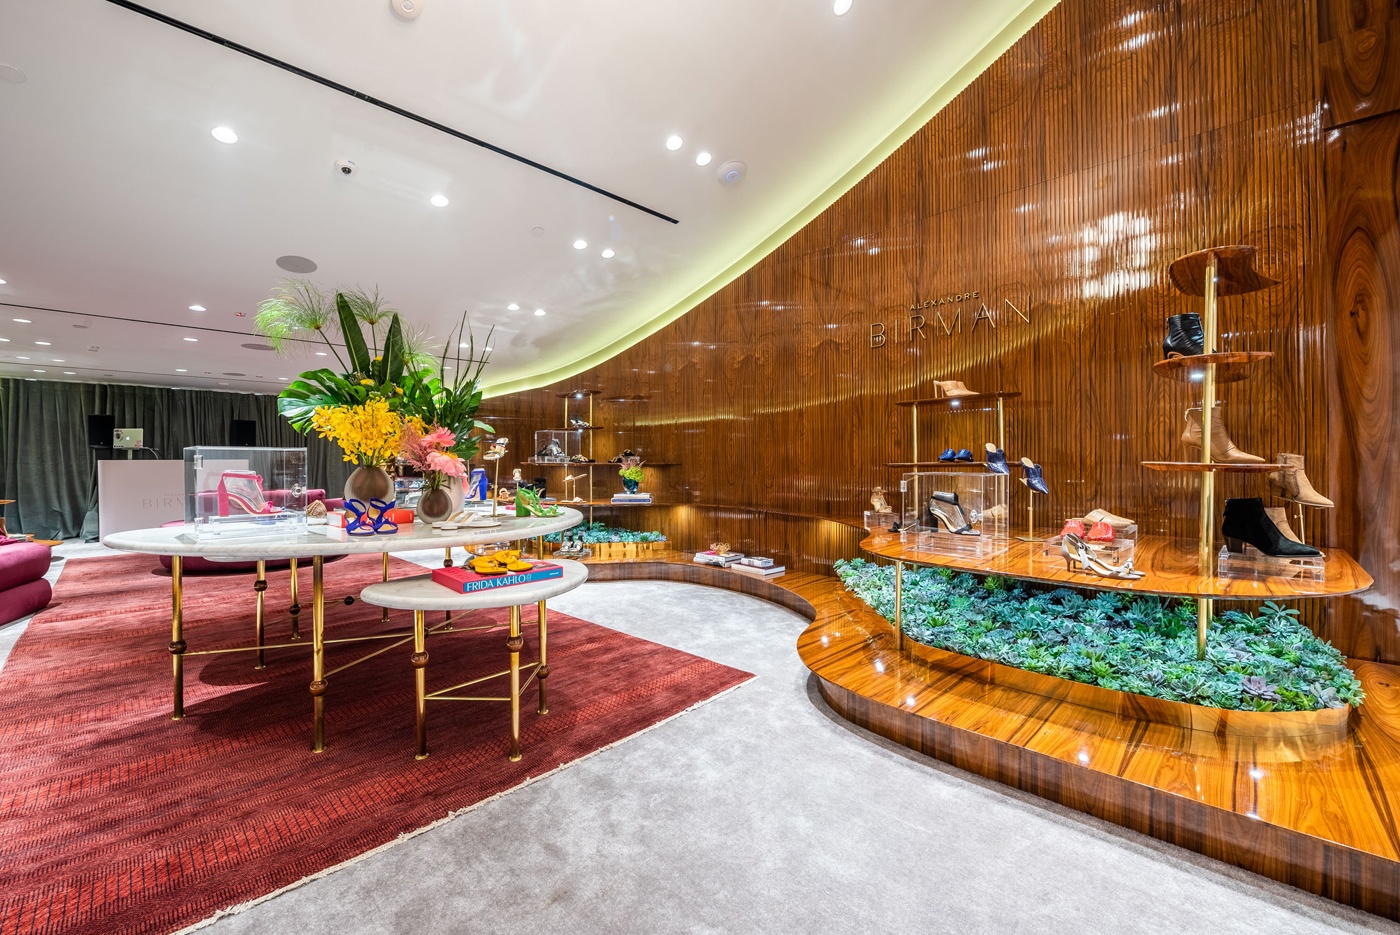 Inside the newly opened Alexandre Birman Bal Harbour boutique inspired by Brazilian mid-century design, which can be seen by the architectural chandeliers and ridge design along the walls.